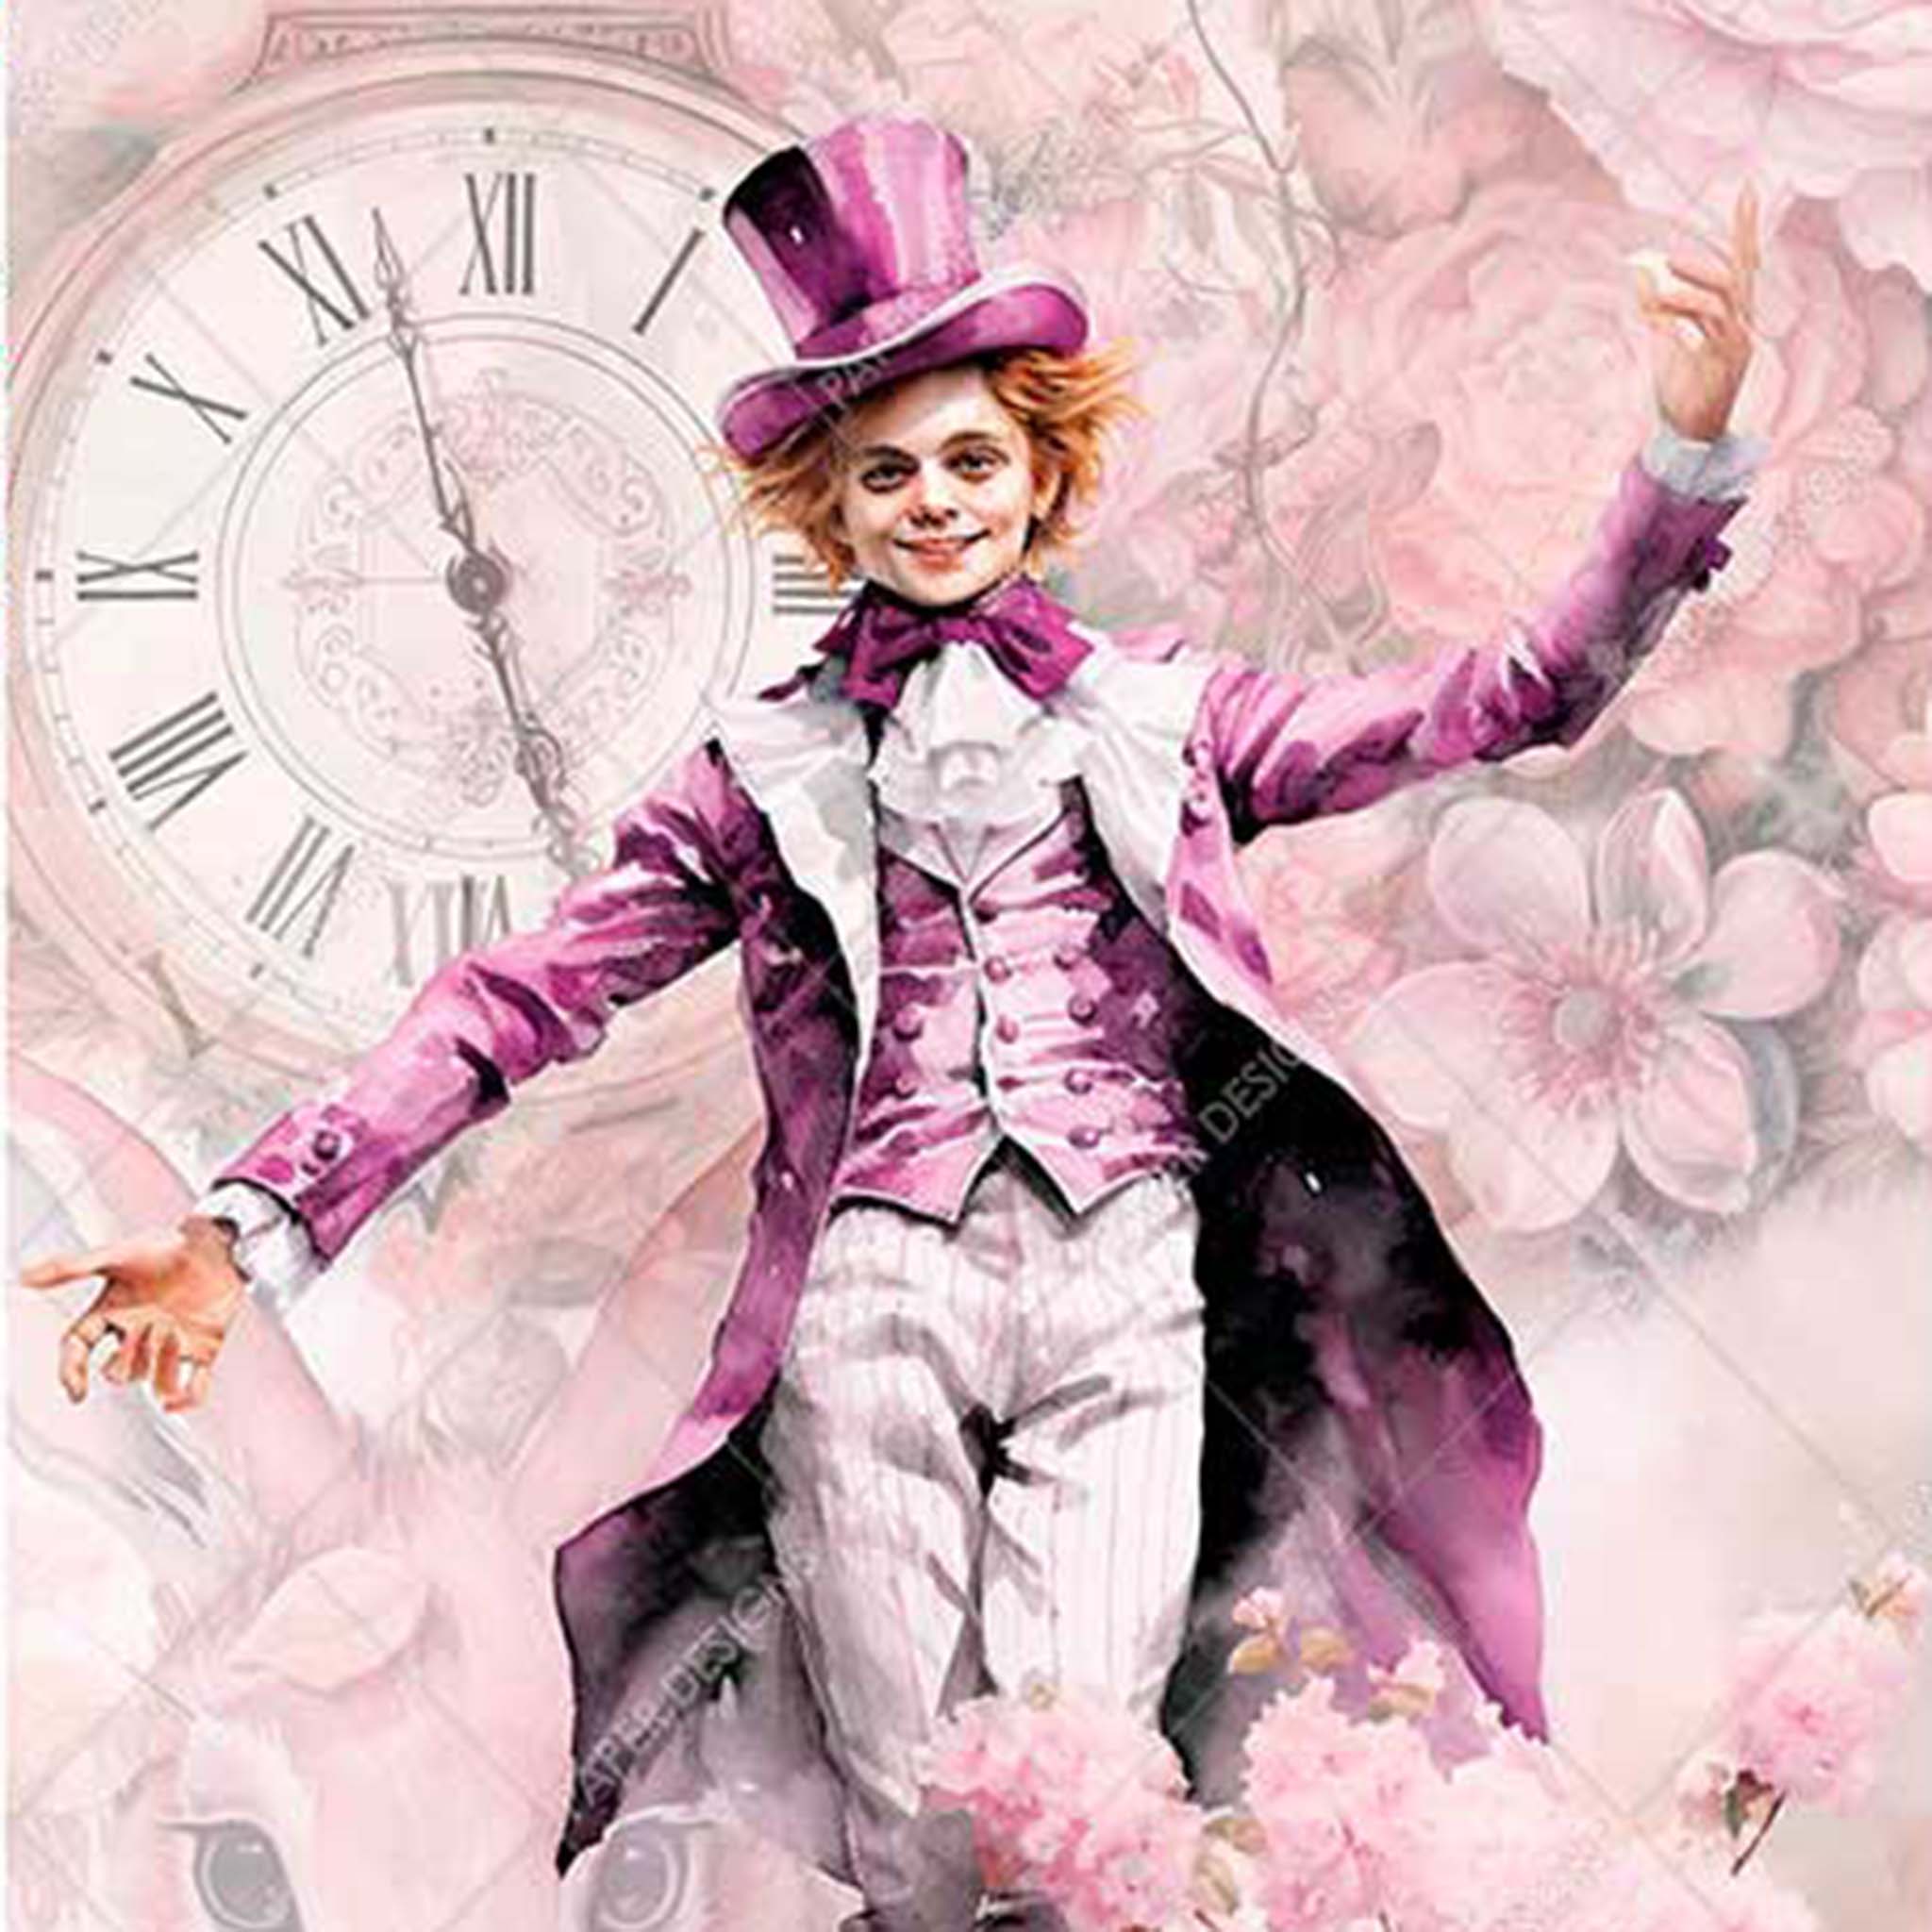 Close-up of an A1 rice paper design featuring The Mad Hatter and a tea set against a large clock face and rabbit face in front of a pink floral background.